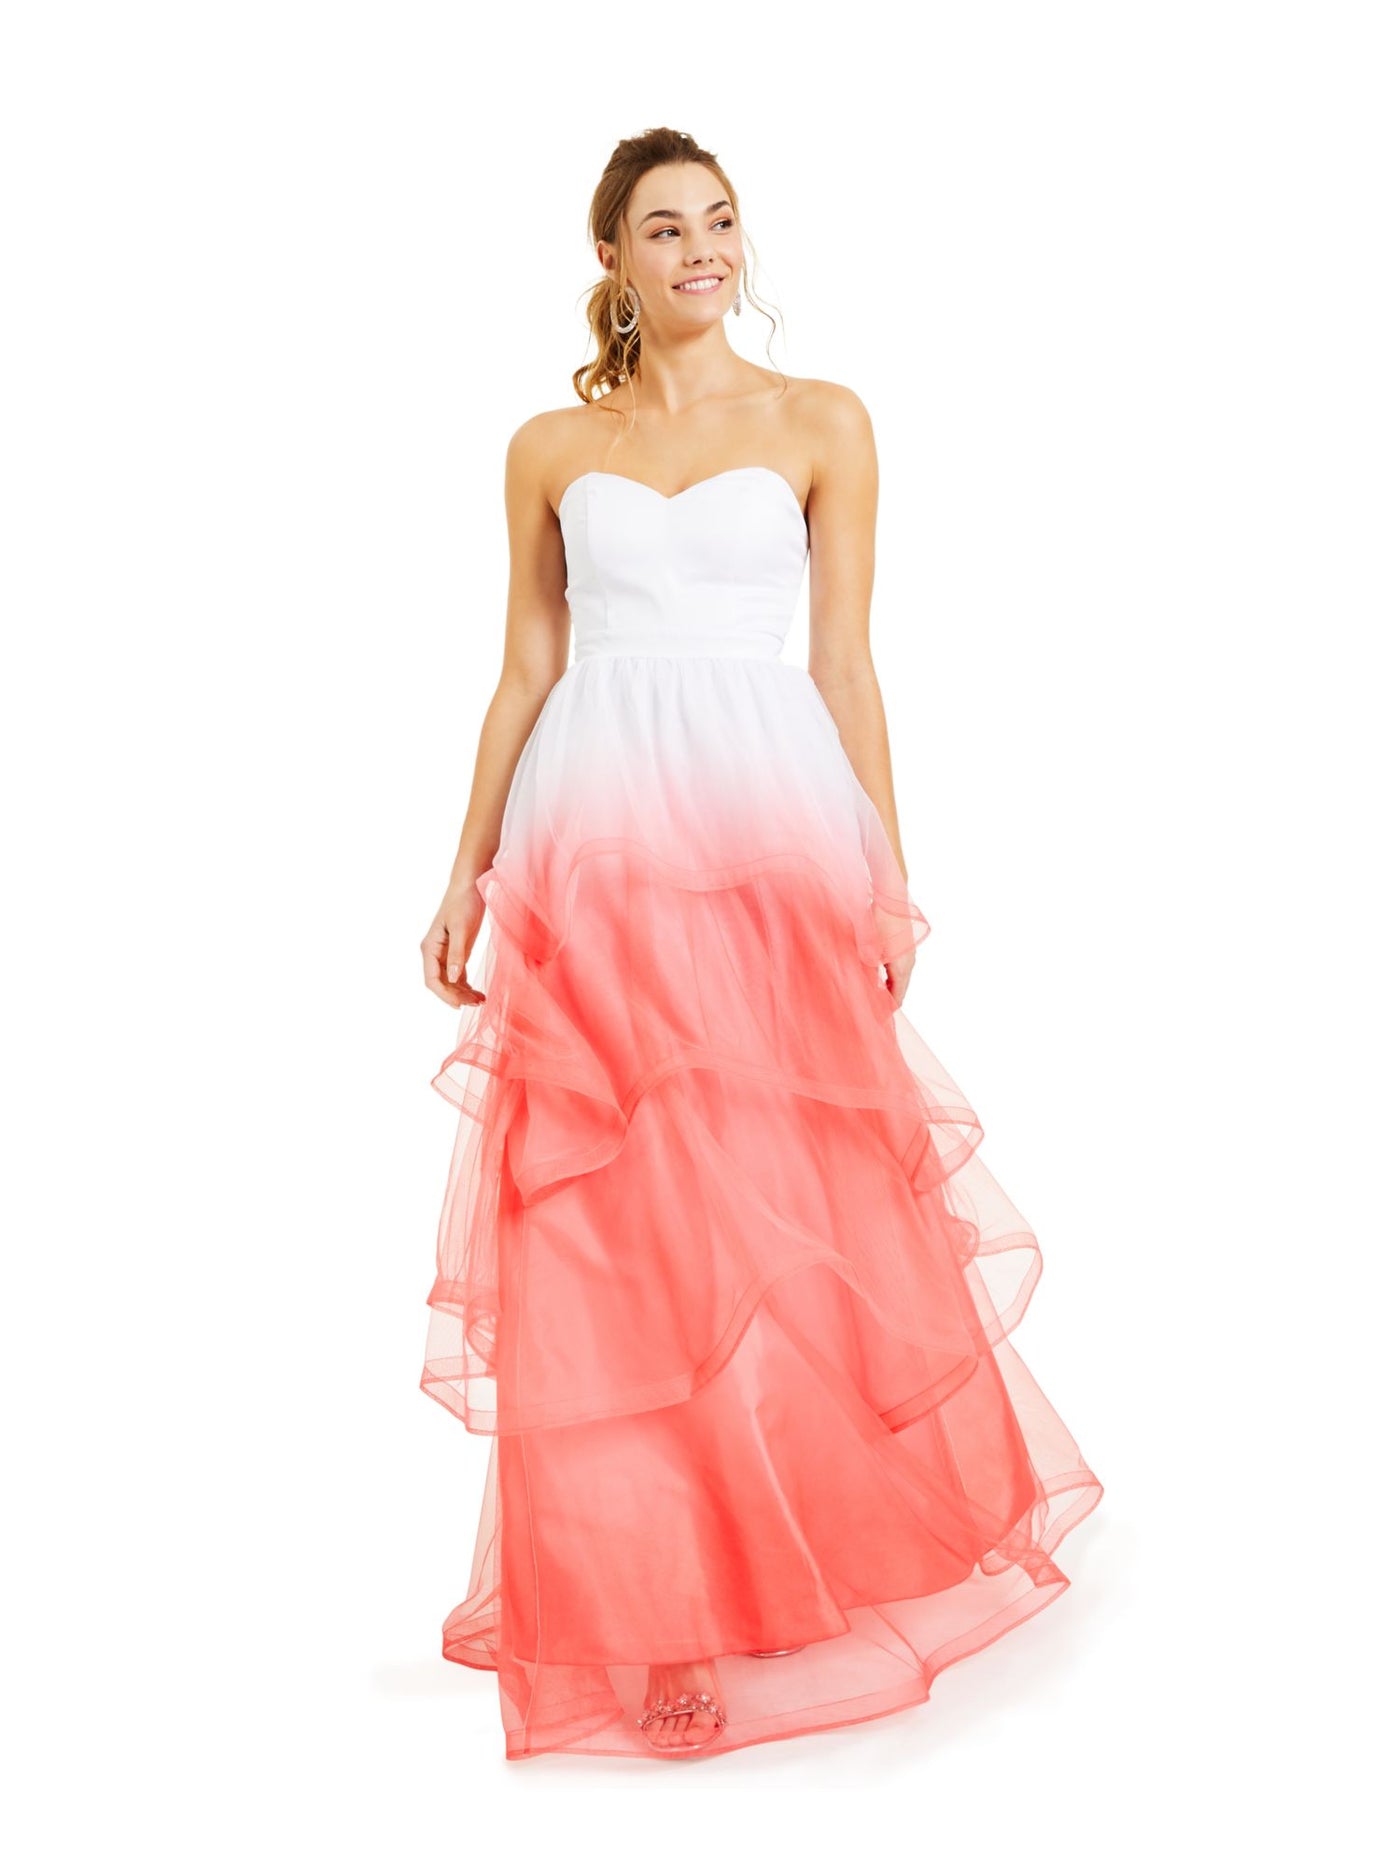 CRYSTAL DOLLS Womens Coral Ombre Strapless Full-Length Formal Fit + Flare Dress Juniors 13